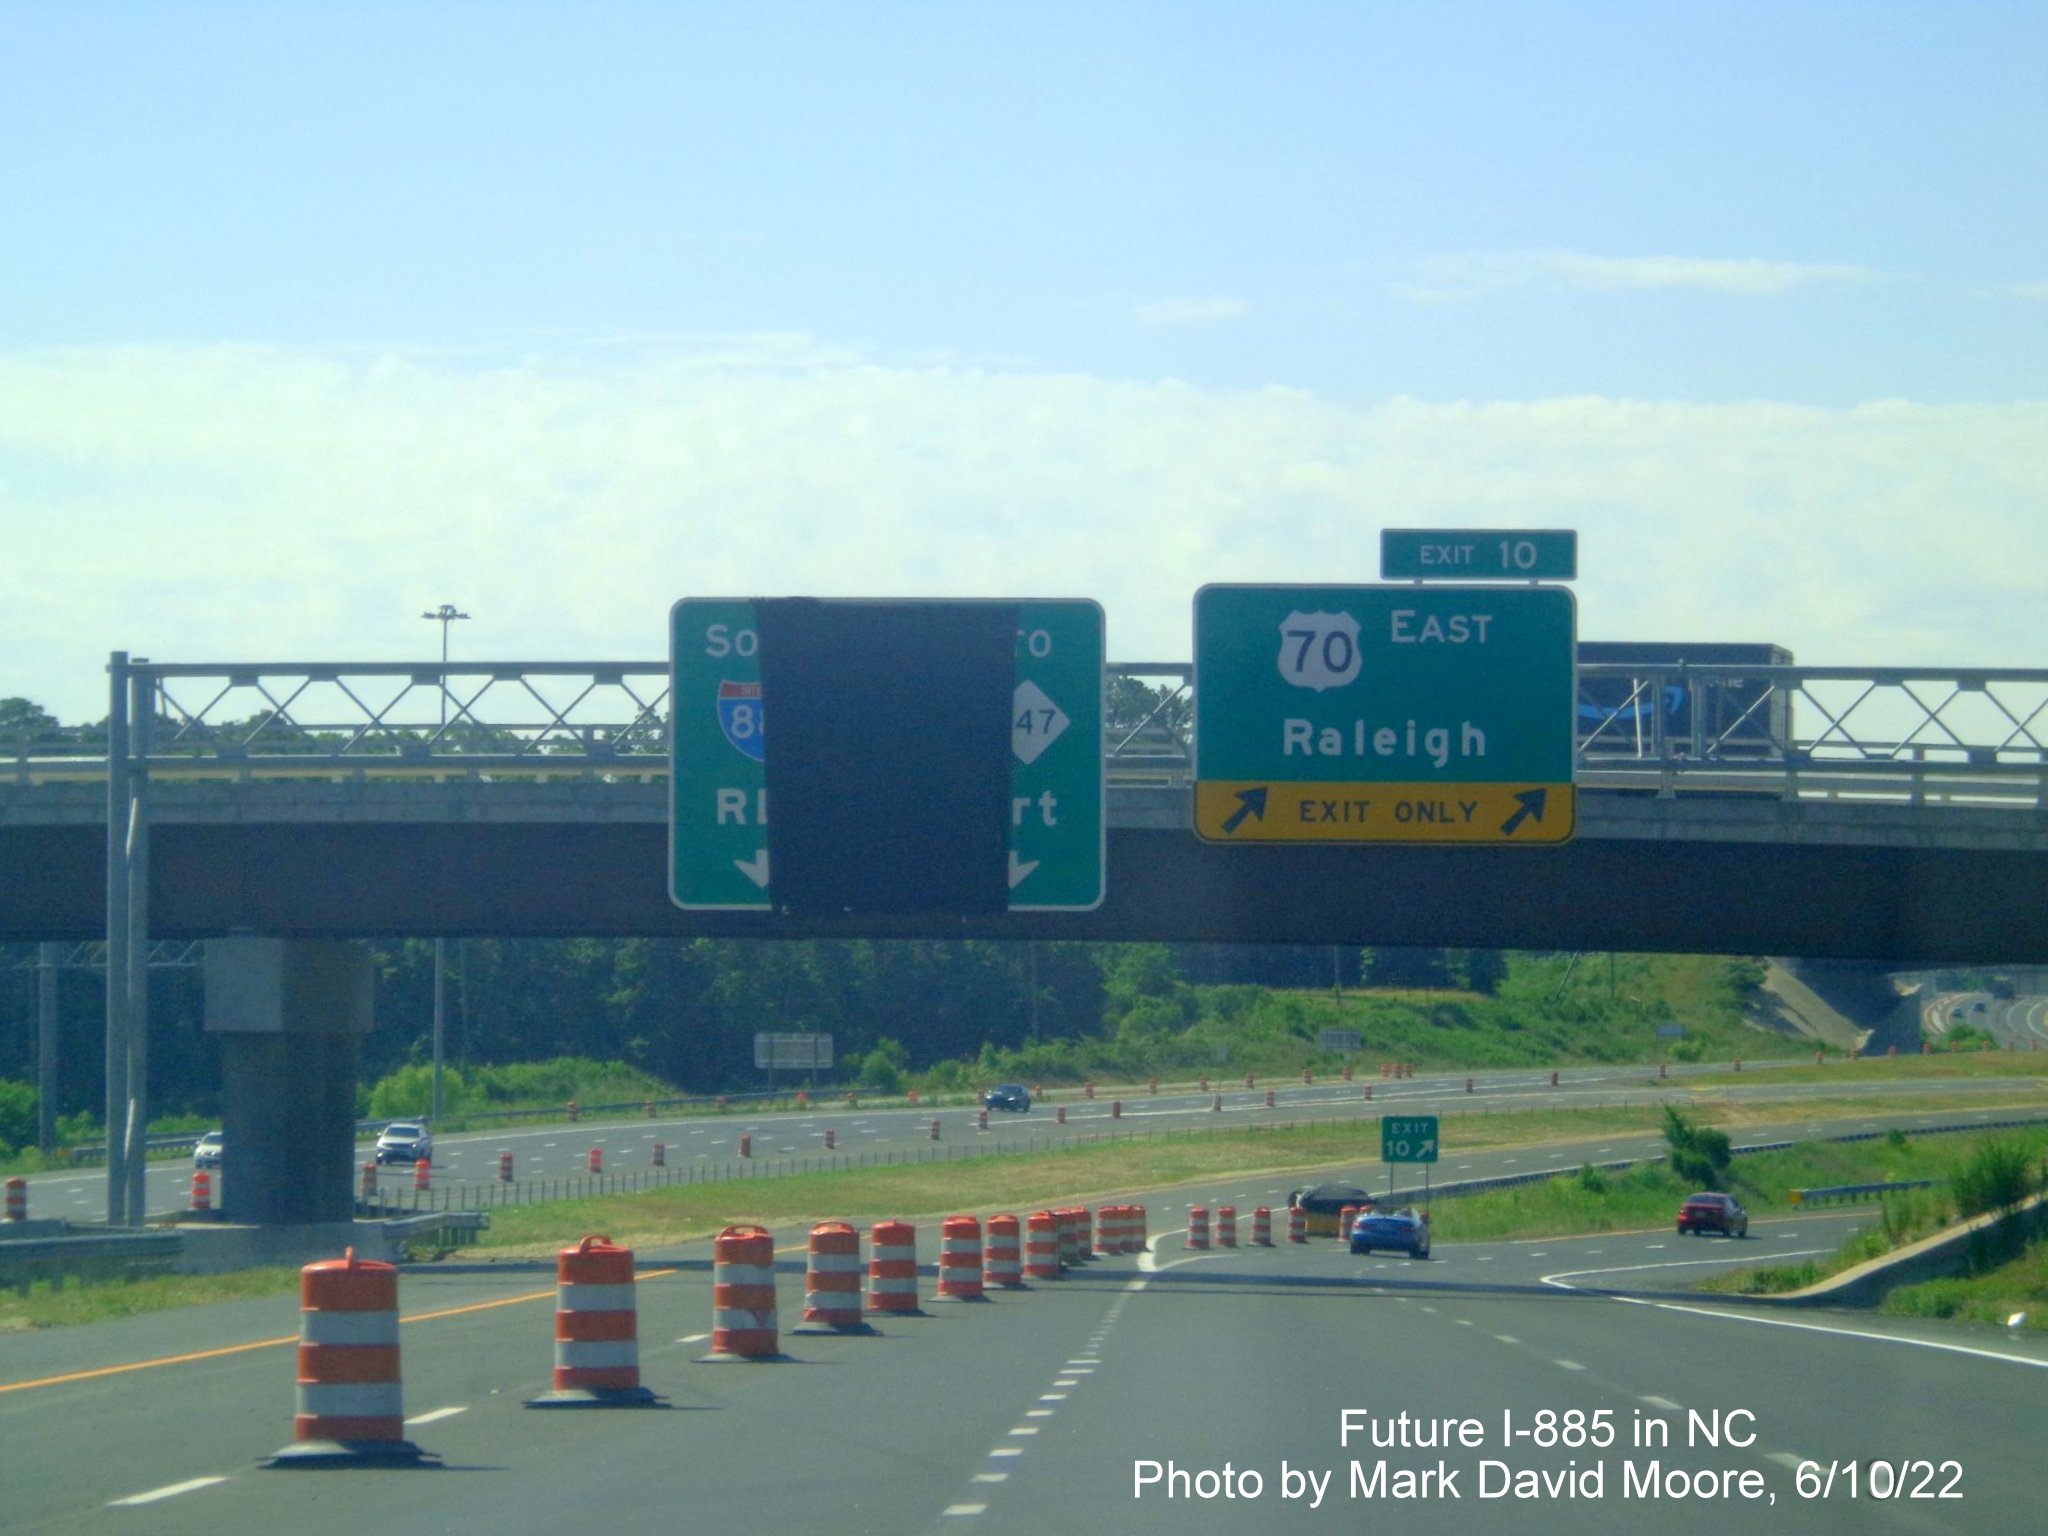 Image of new lane markings for Future I-885 South approaching US 70 East
        exit ramp in Durham, by Mark David Moore June 2022